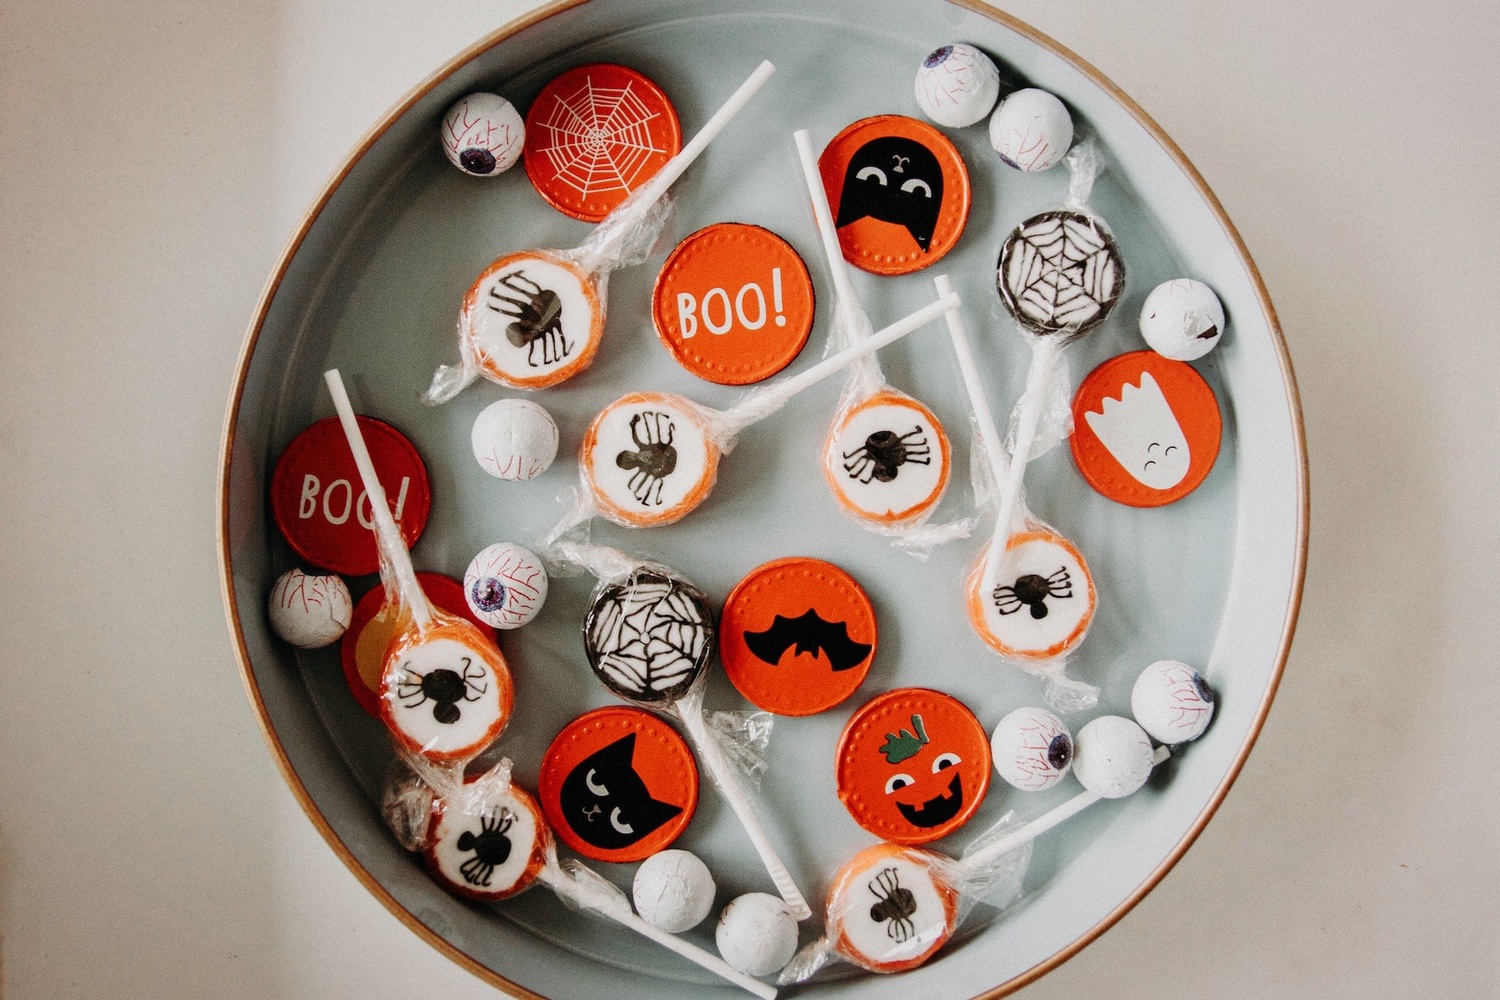 4 tips to prevent high sugar on Halloween